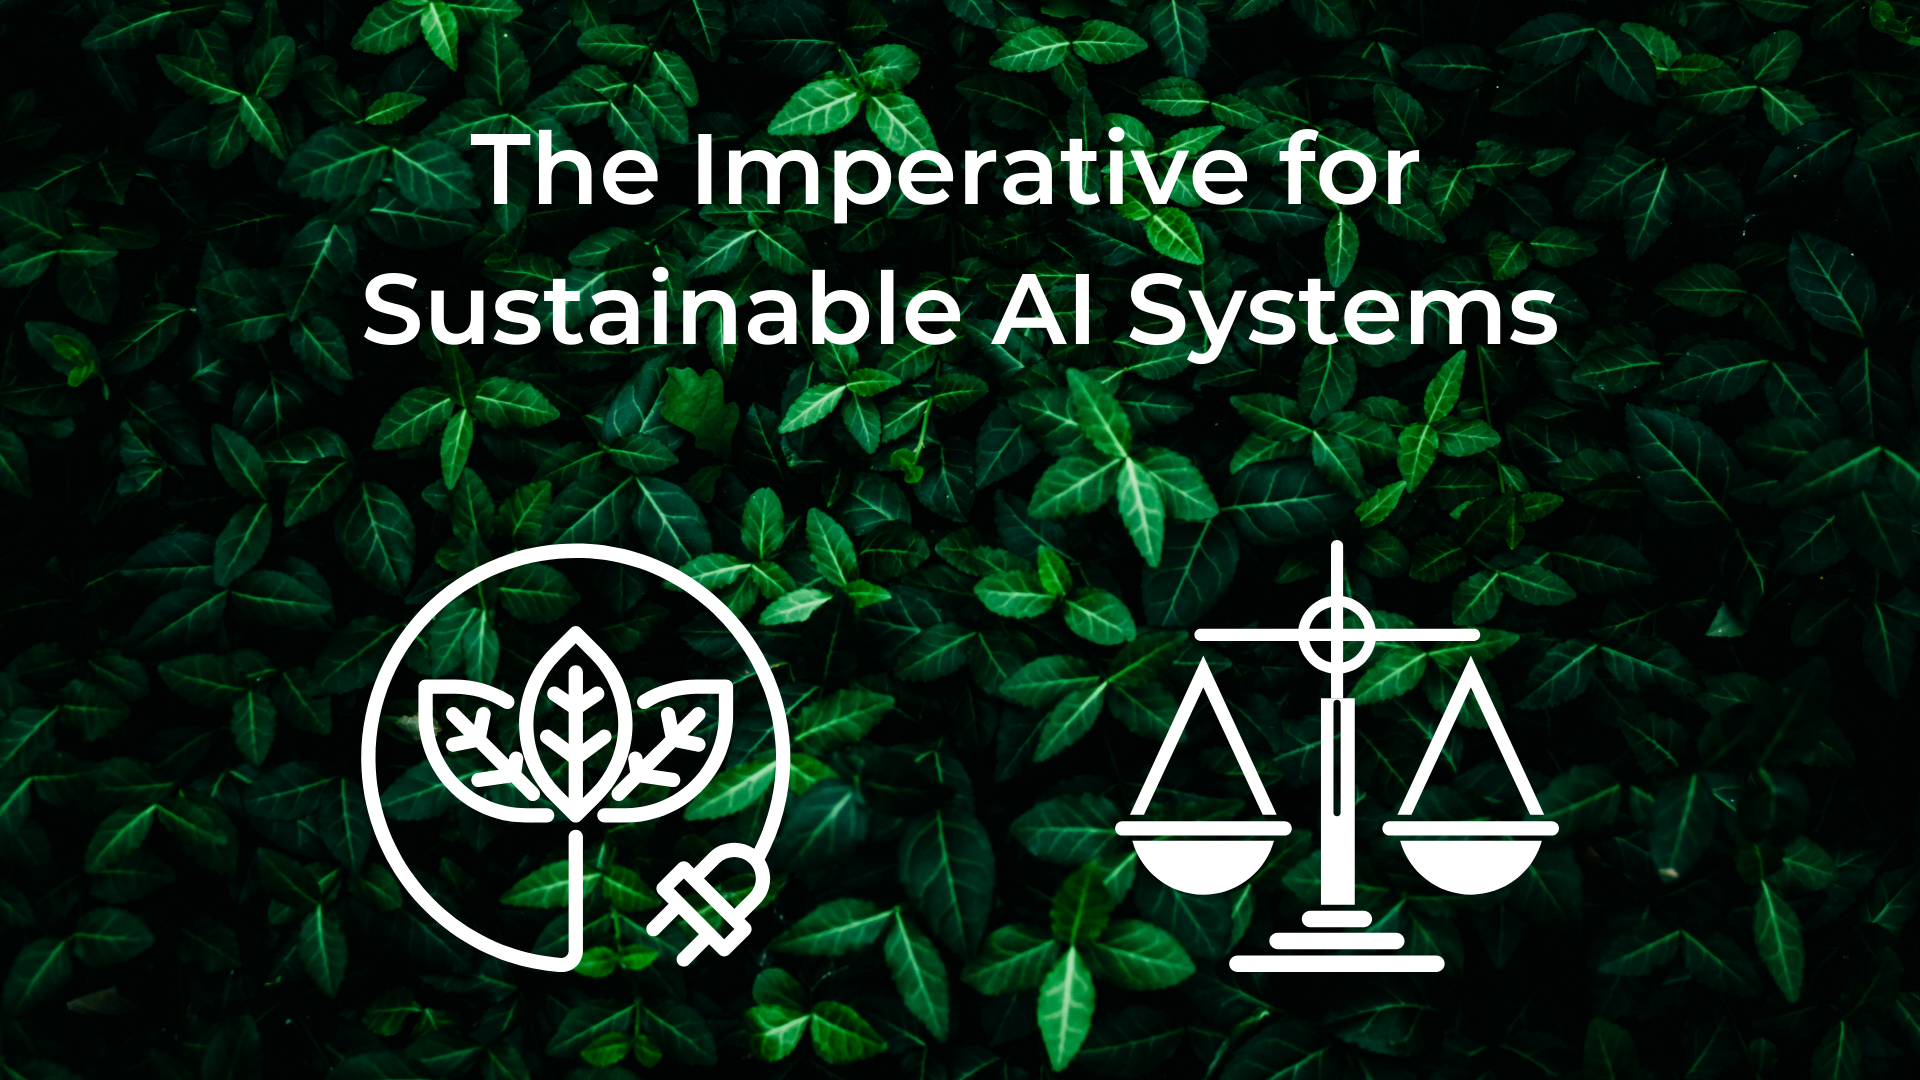 The Imperative for Sustainable AI Systems